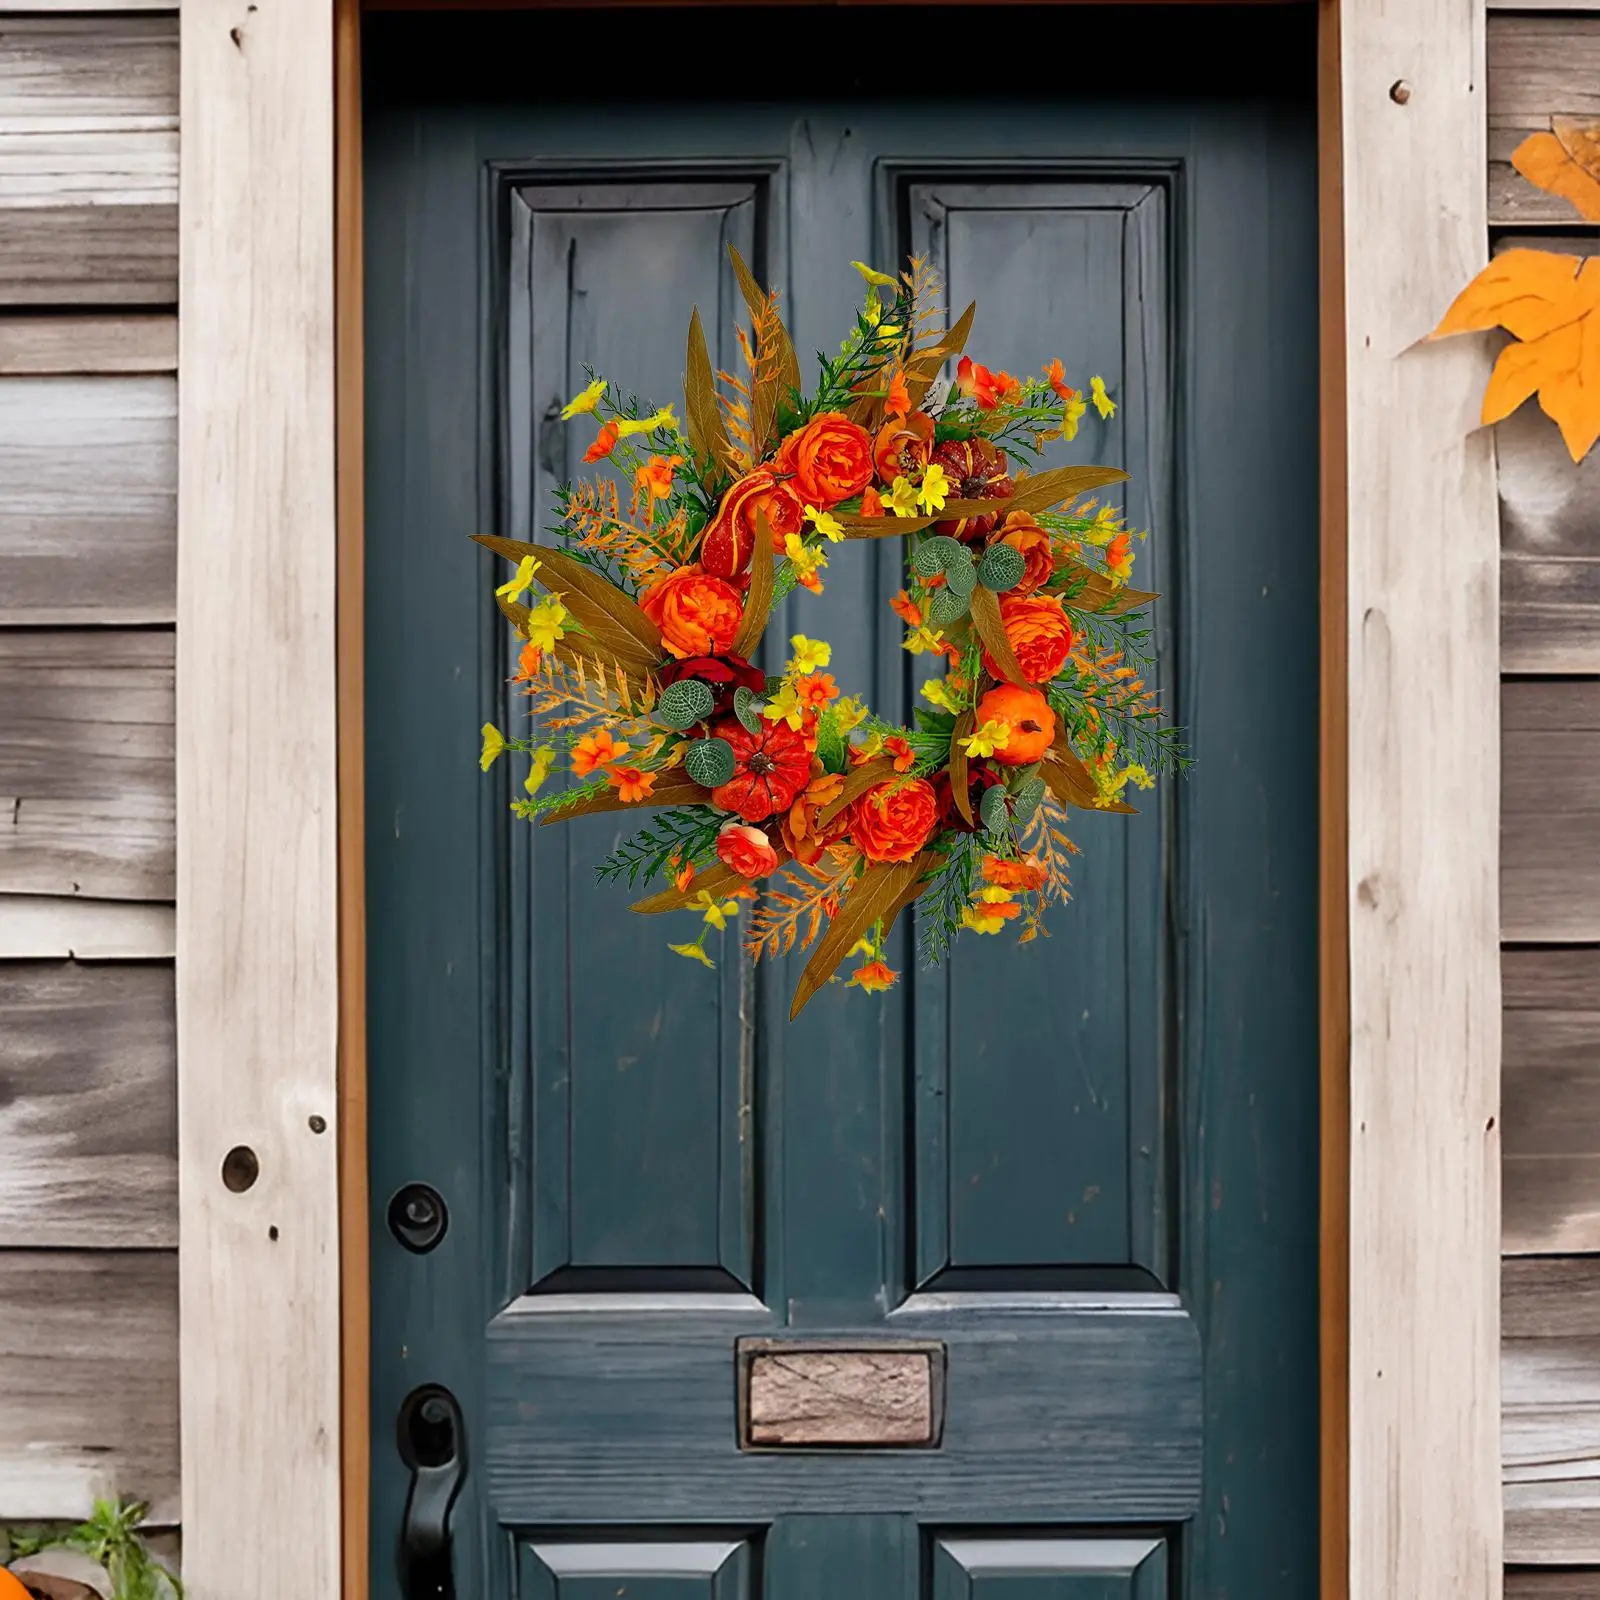 Fall Wreath Fall Peony and Pumpkin Wreath Autumn Wreath for Front Door for Fall Harvest Festival Thanksgiving Indoor Decor